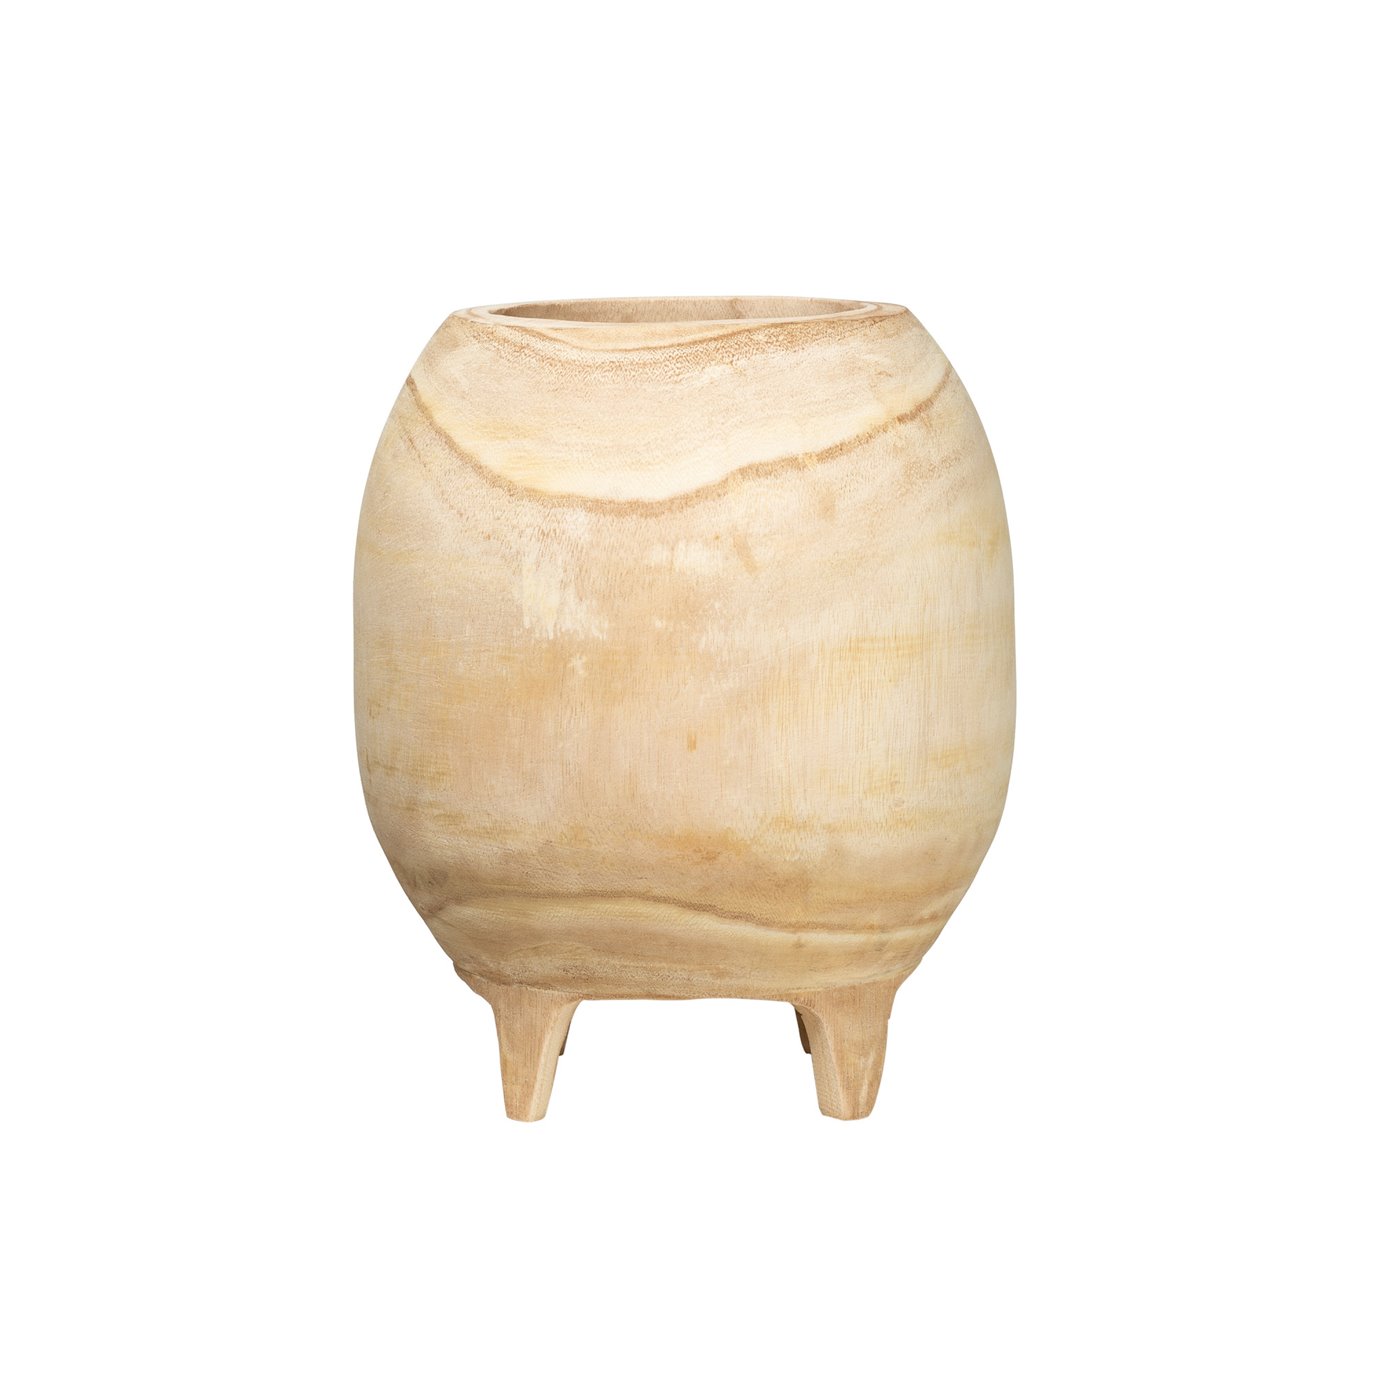 12"H Footed Paulownia Wood Planter (Holds 9" Pot)